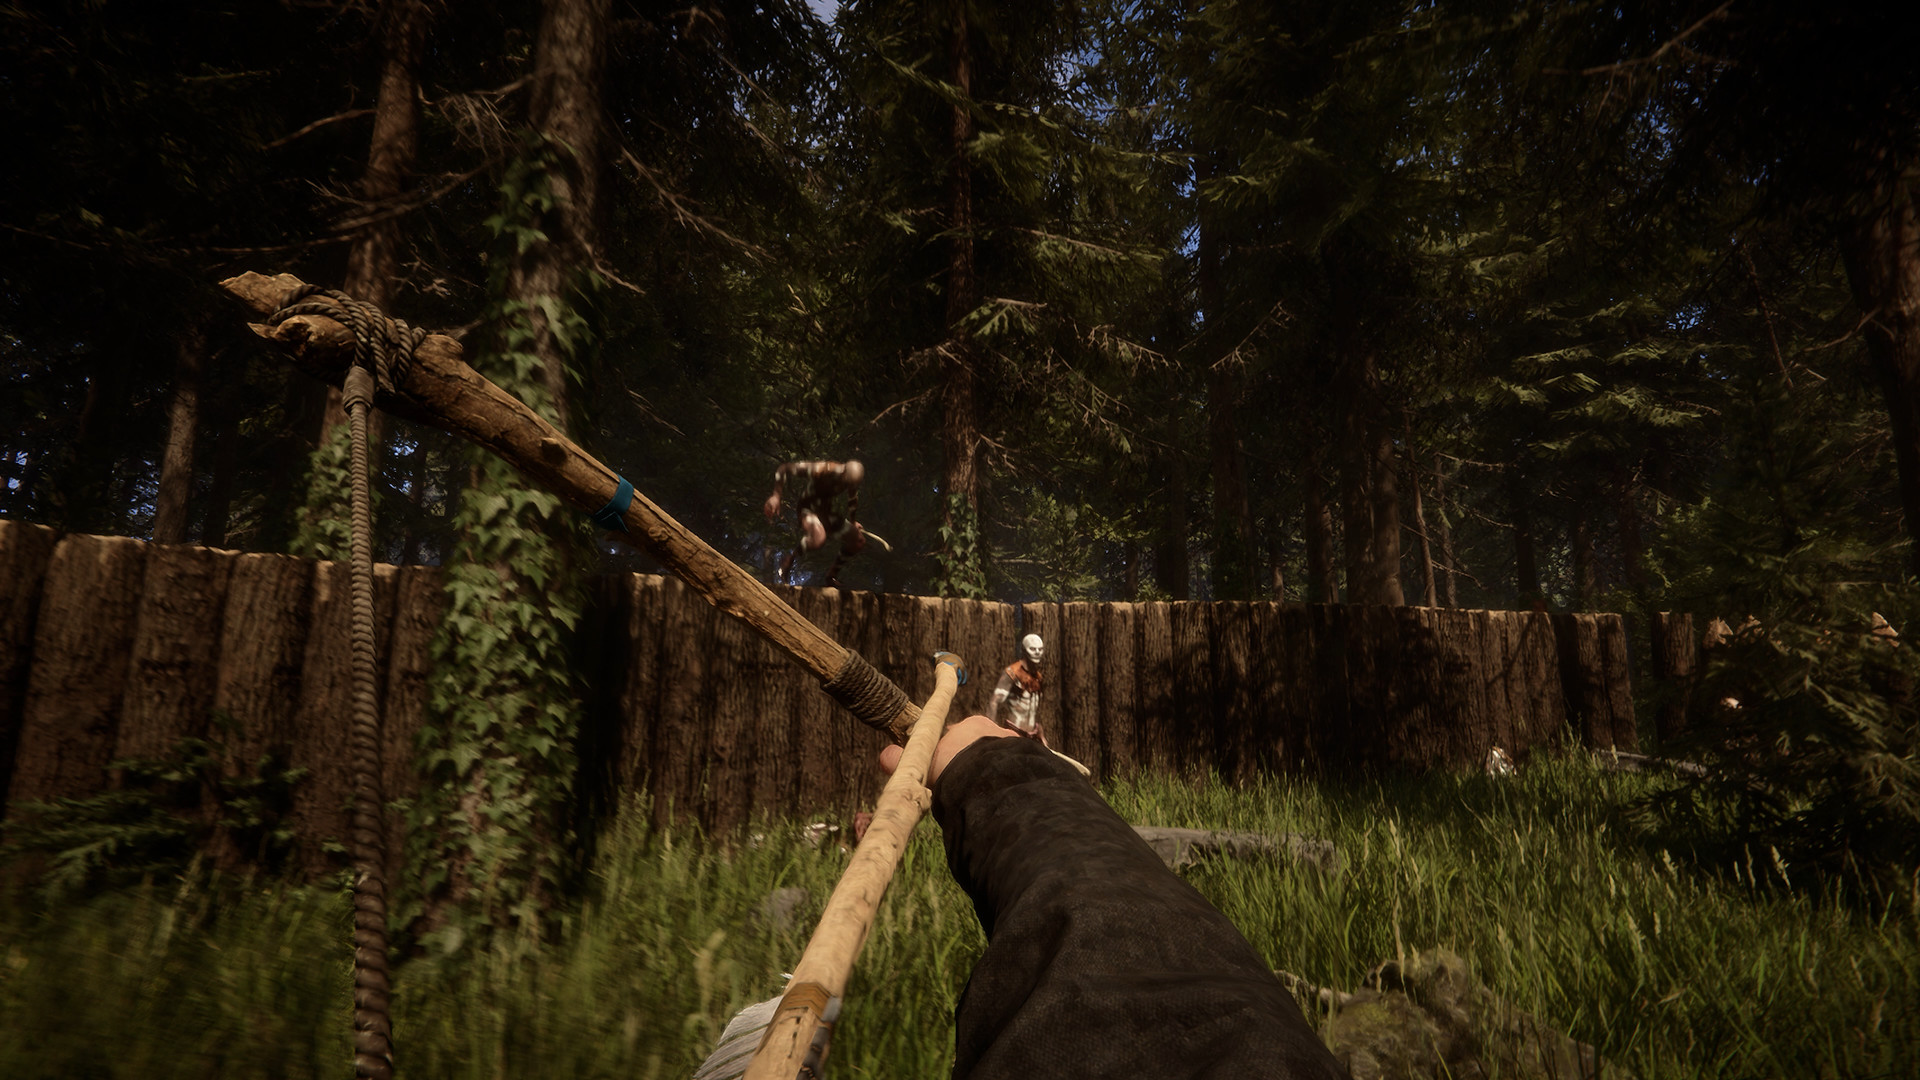 Sons Of The Forest Trainer - FLiNG Trainer - PC Game Cheats and Mods